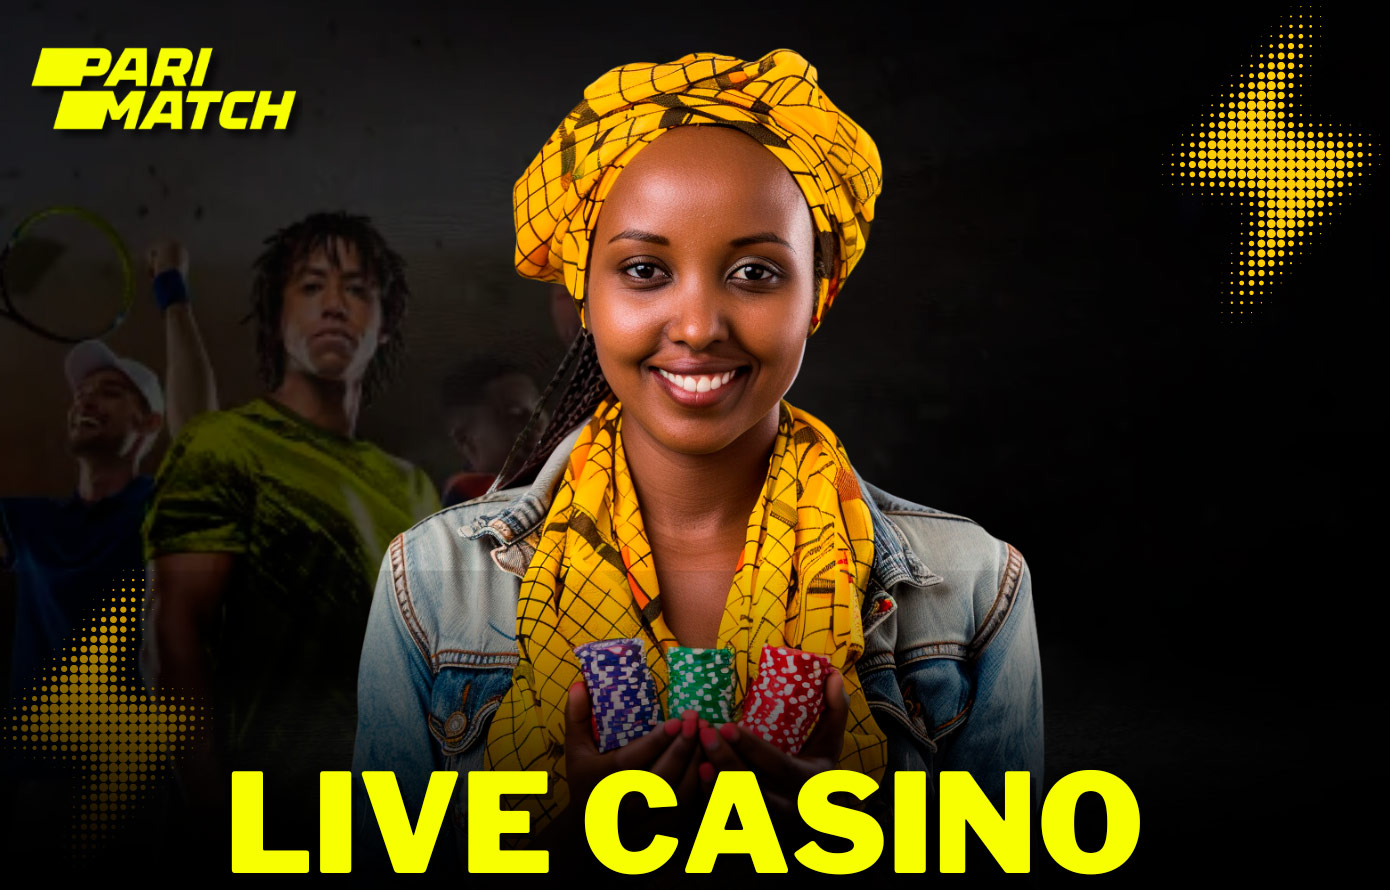 Parimatch casino games with live dealers